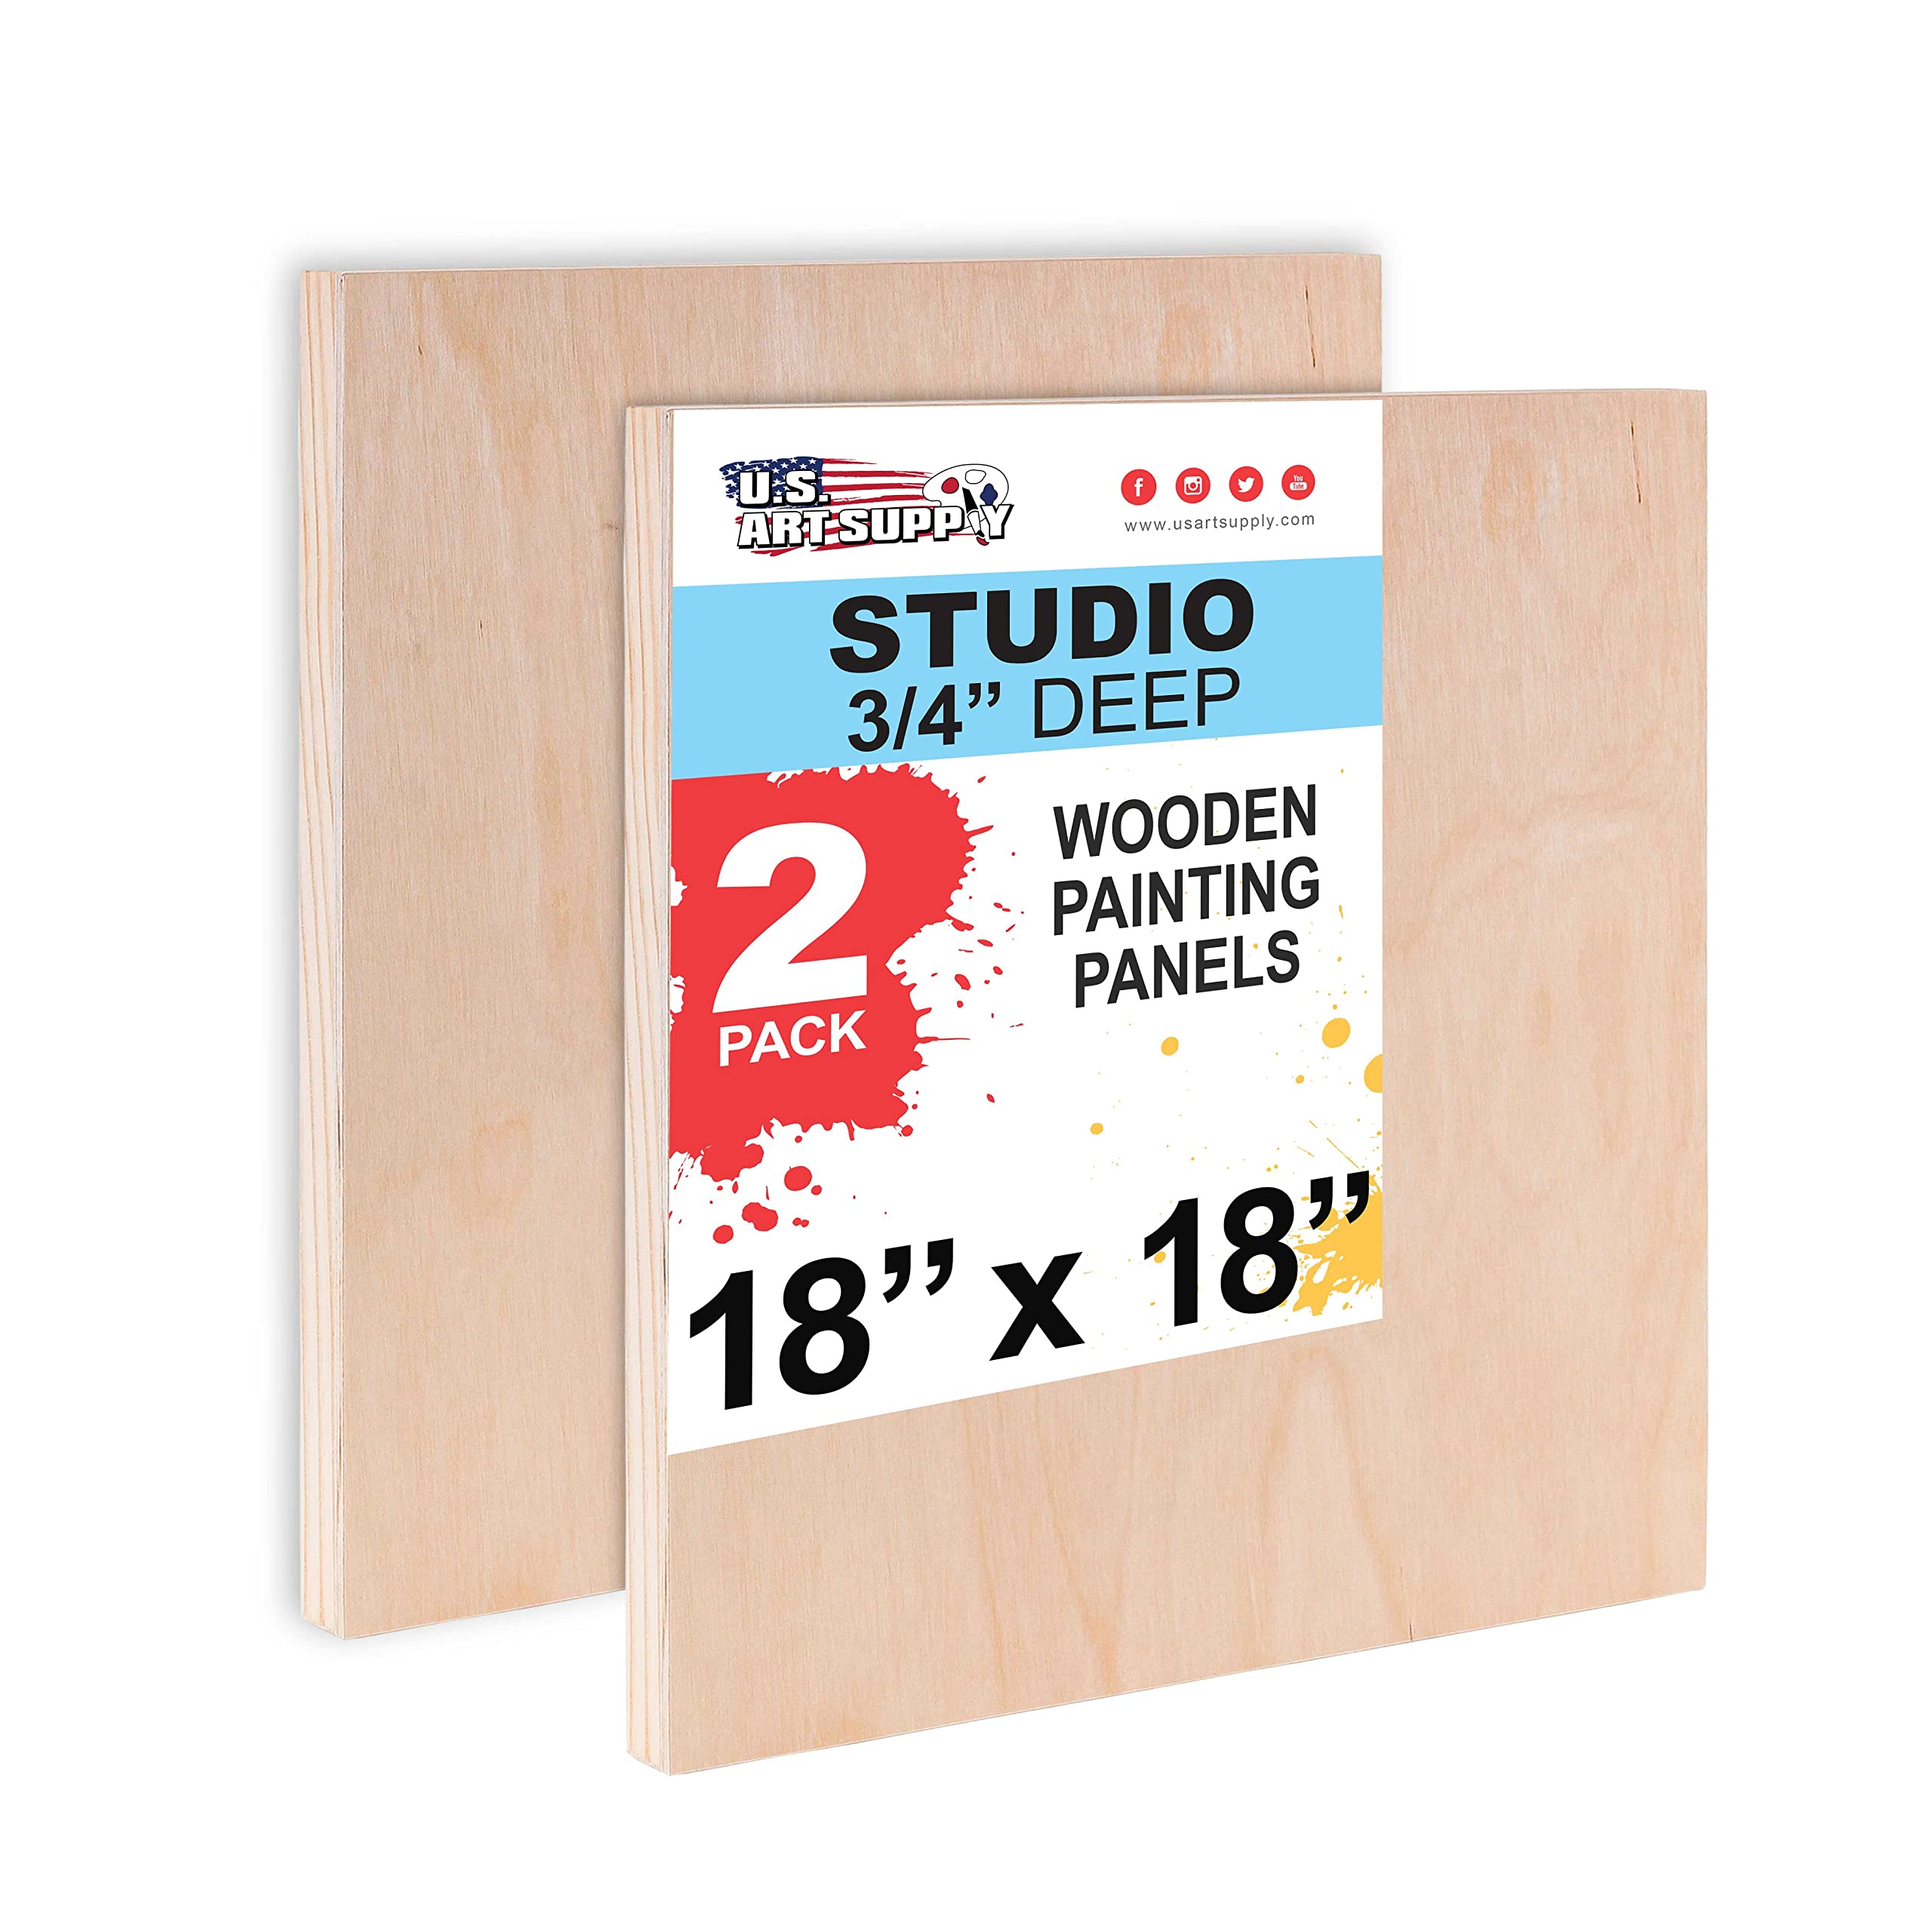 U.S. Art Supply 18 x 18 Birch Wood Paint Pouring Panel Boards Studio 3/4  Deep Cradle (Pack of 2) - Artist Wooden Wall Canvases - Painting  Mixed-Media Craft Acrylic Oil Watercolor Encaustic